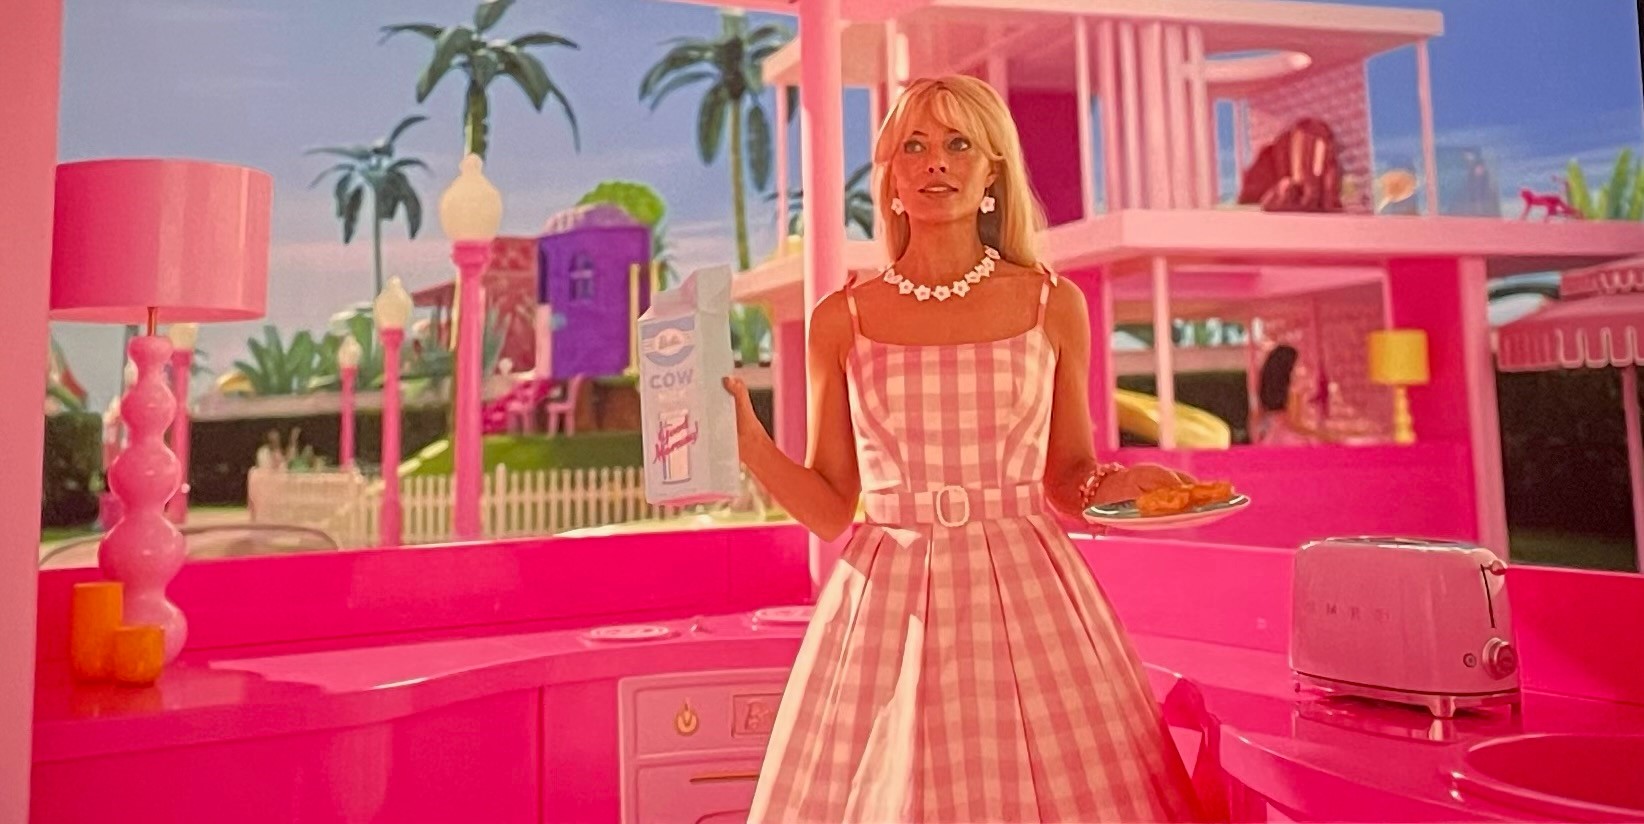 The “Barbie” movie, starring Margot Robbie and Ryan Gosling, appeared in theaters on July 21 this year and has been a smash hit ever since. Debates arise over underlying political messages in the film. 